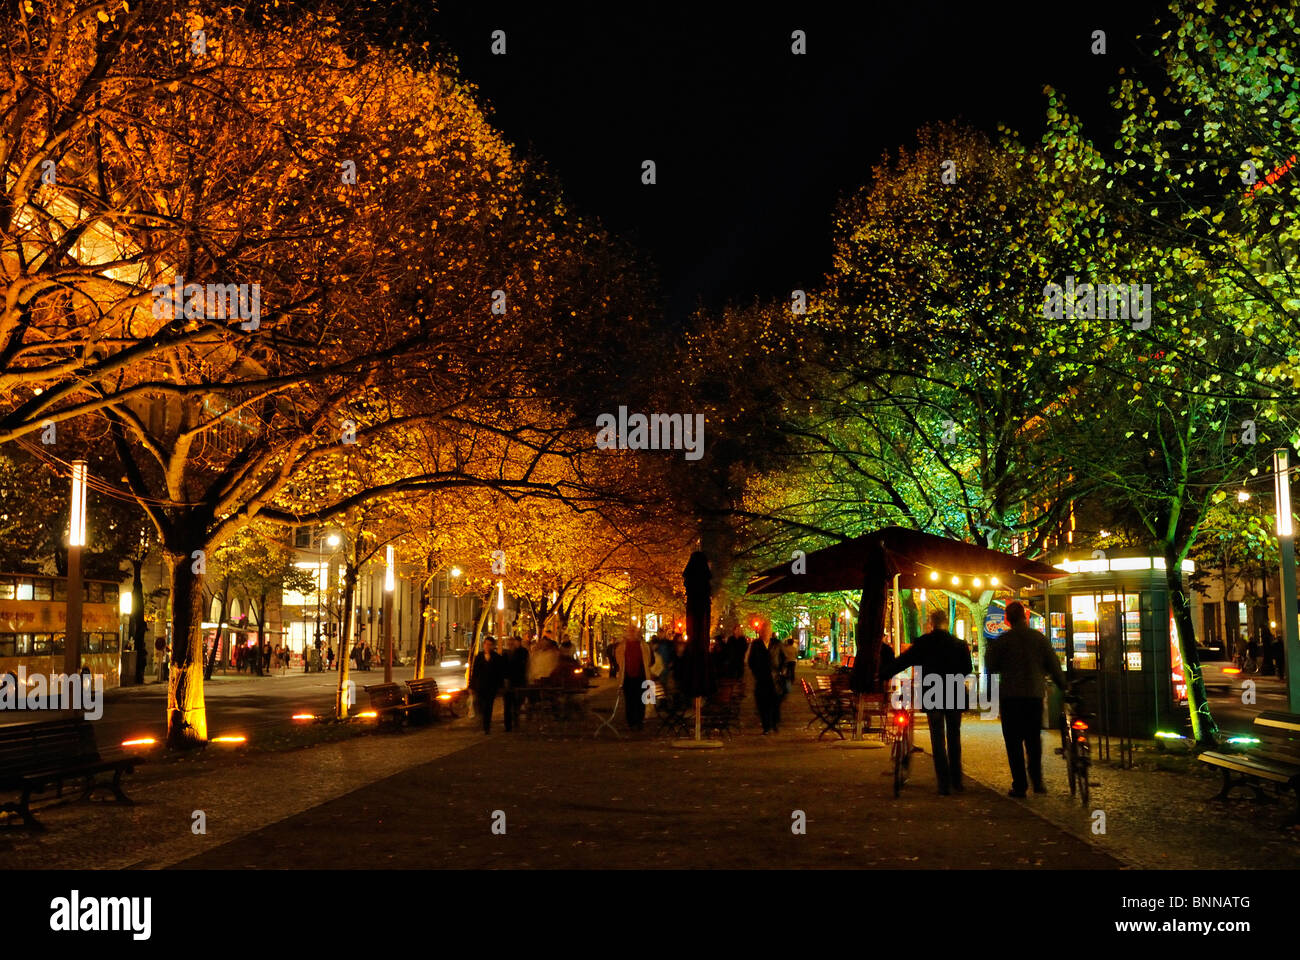 Unter den Linden, avenue, illuminated for the annual Festival of Lights, Mitte district, Berlin, Germany, Europe. Stock Photo